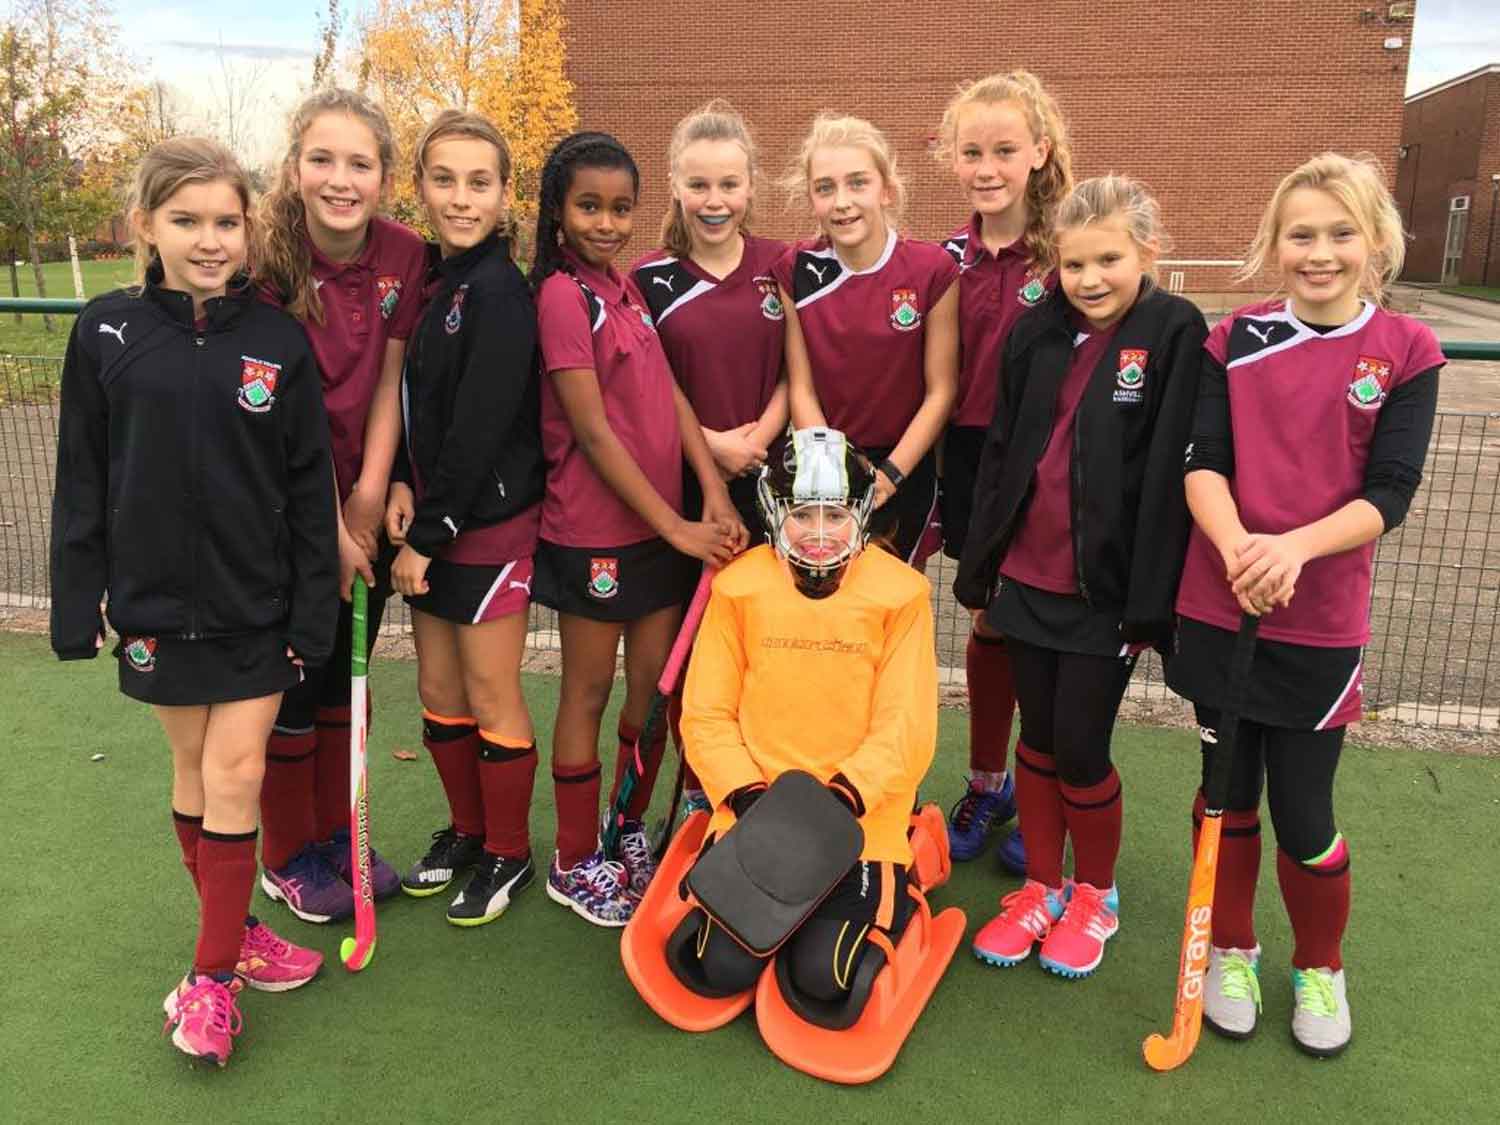 U12 hockey: Proud team! U12 Hockey team after competing in the North Yorkshire Finals